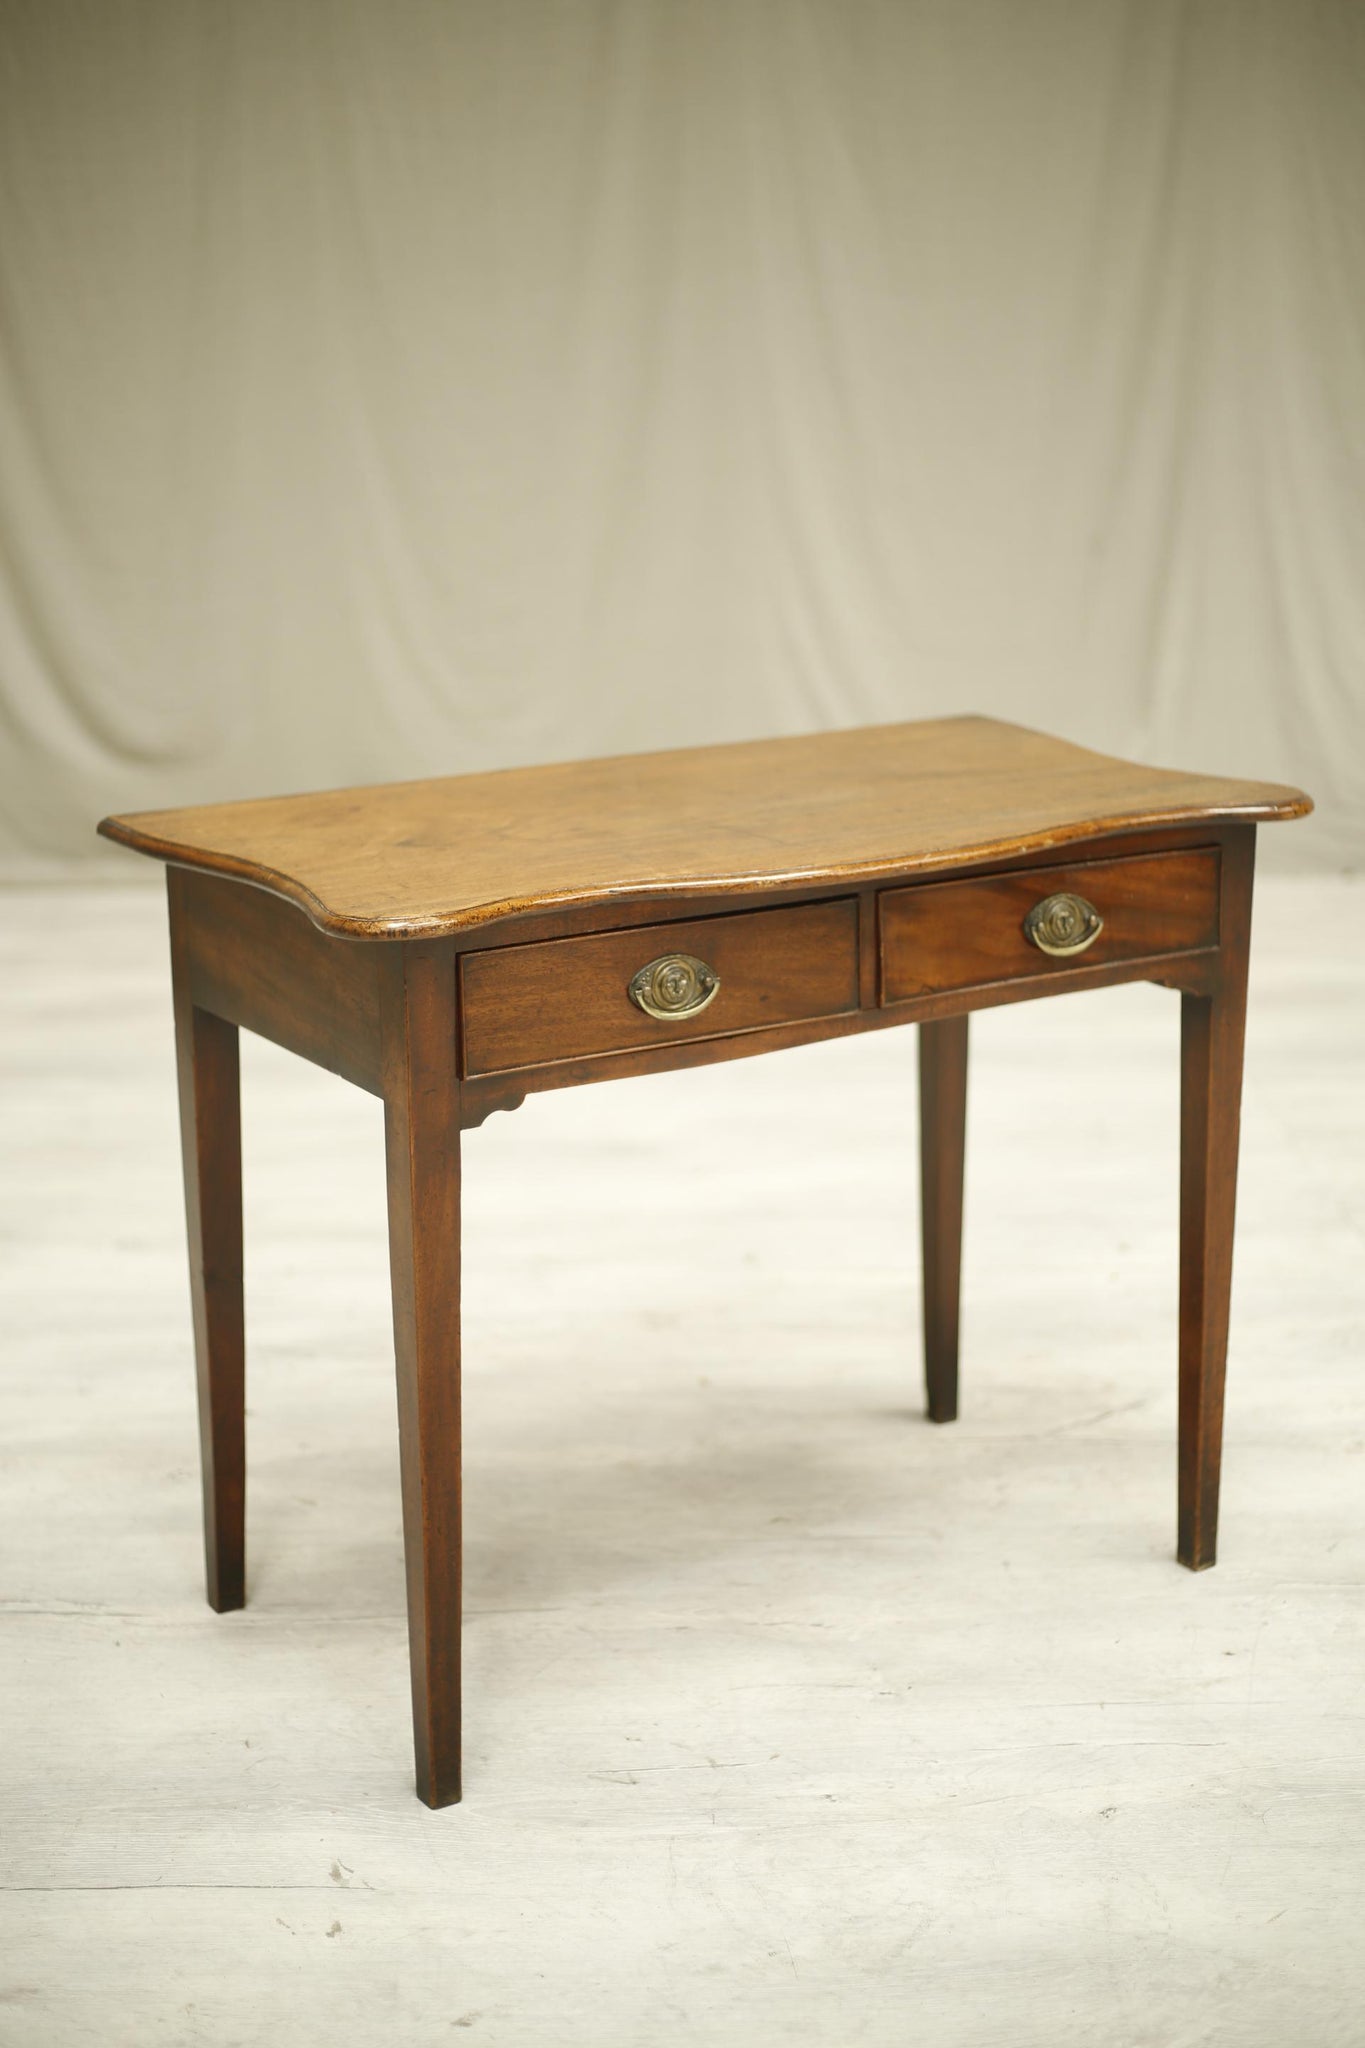 RESERVED 18th century Georgian serpentine side table